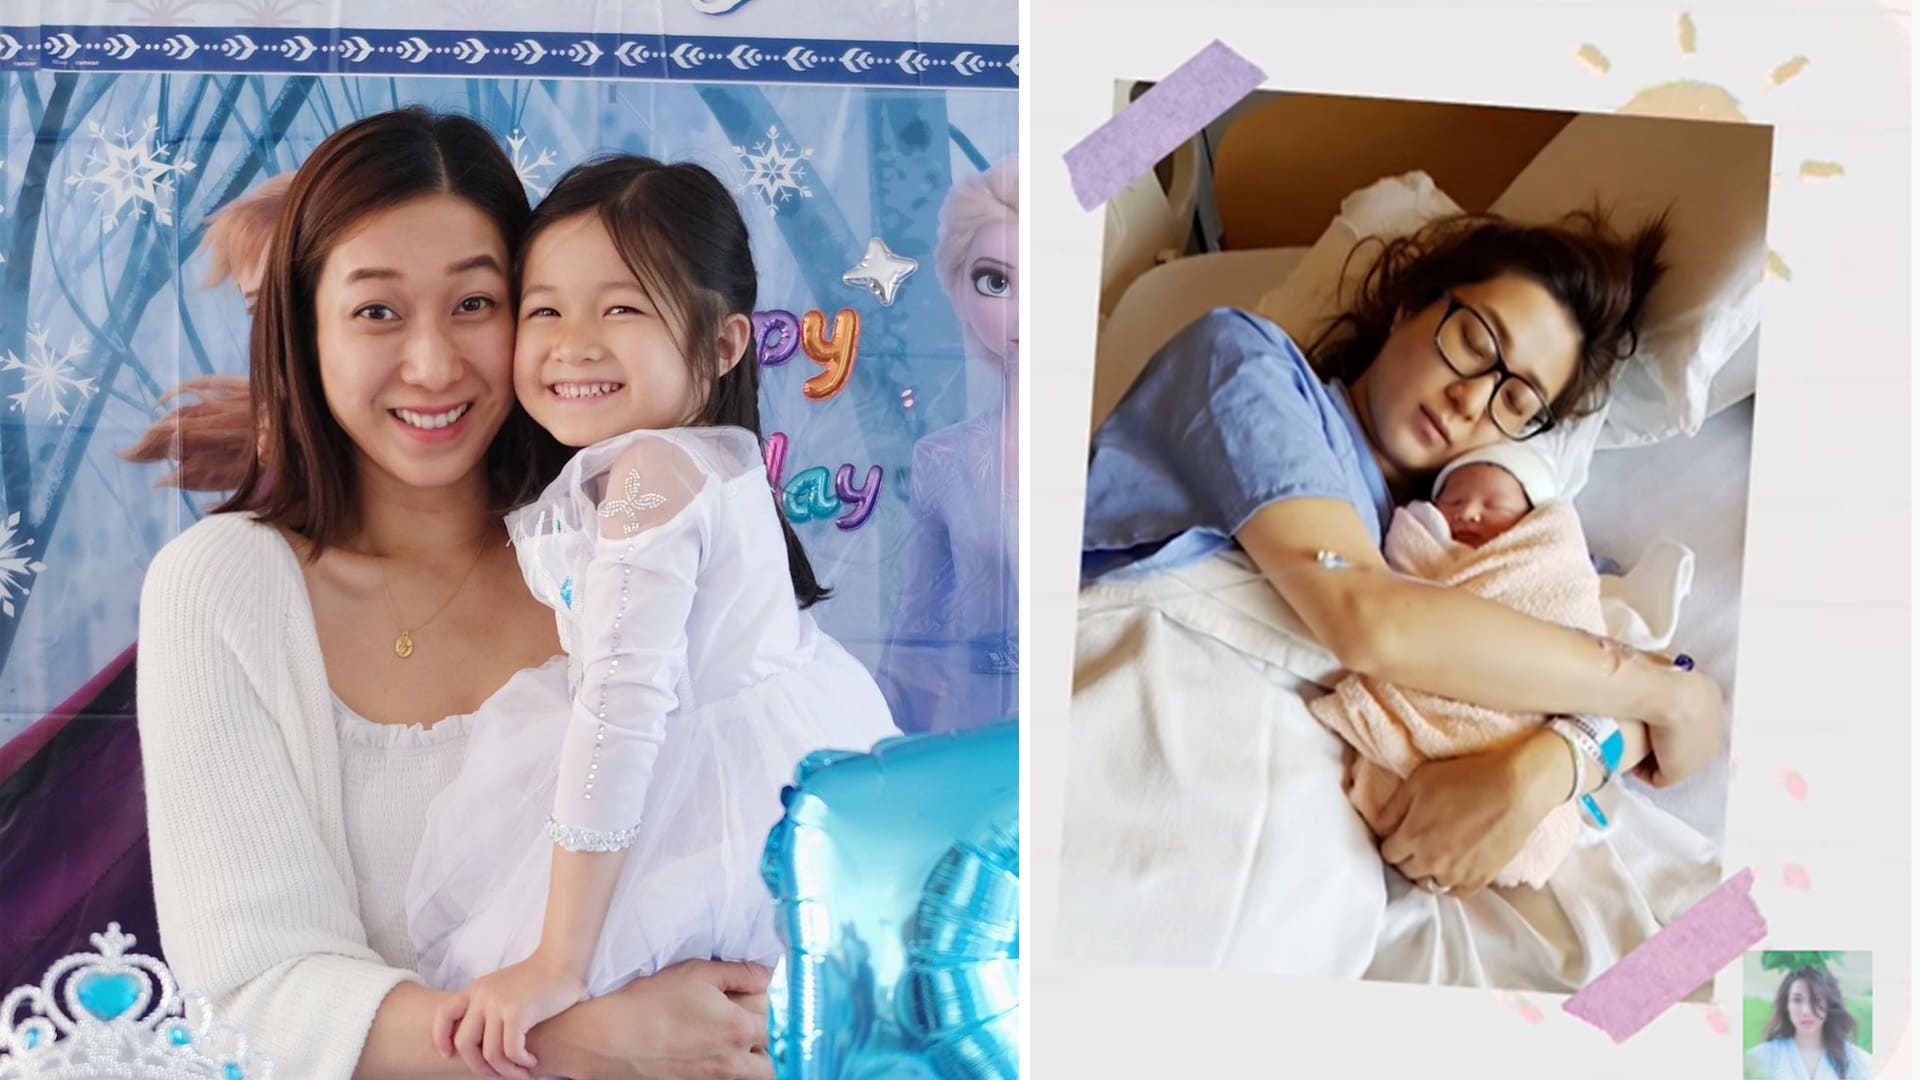 Linda Chung Shares “Painful” Birthing Story, Says She Almost Needed Emergency Surgery After Delivering Her Daughter